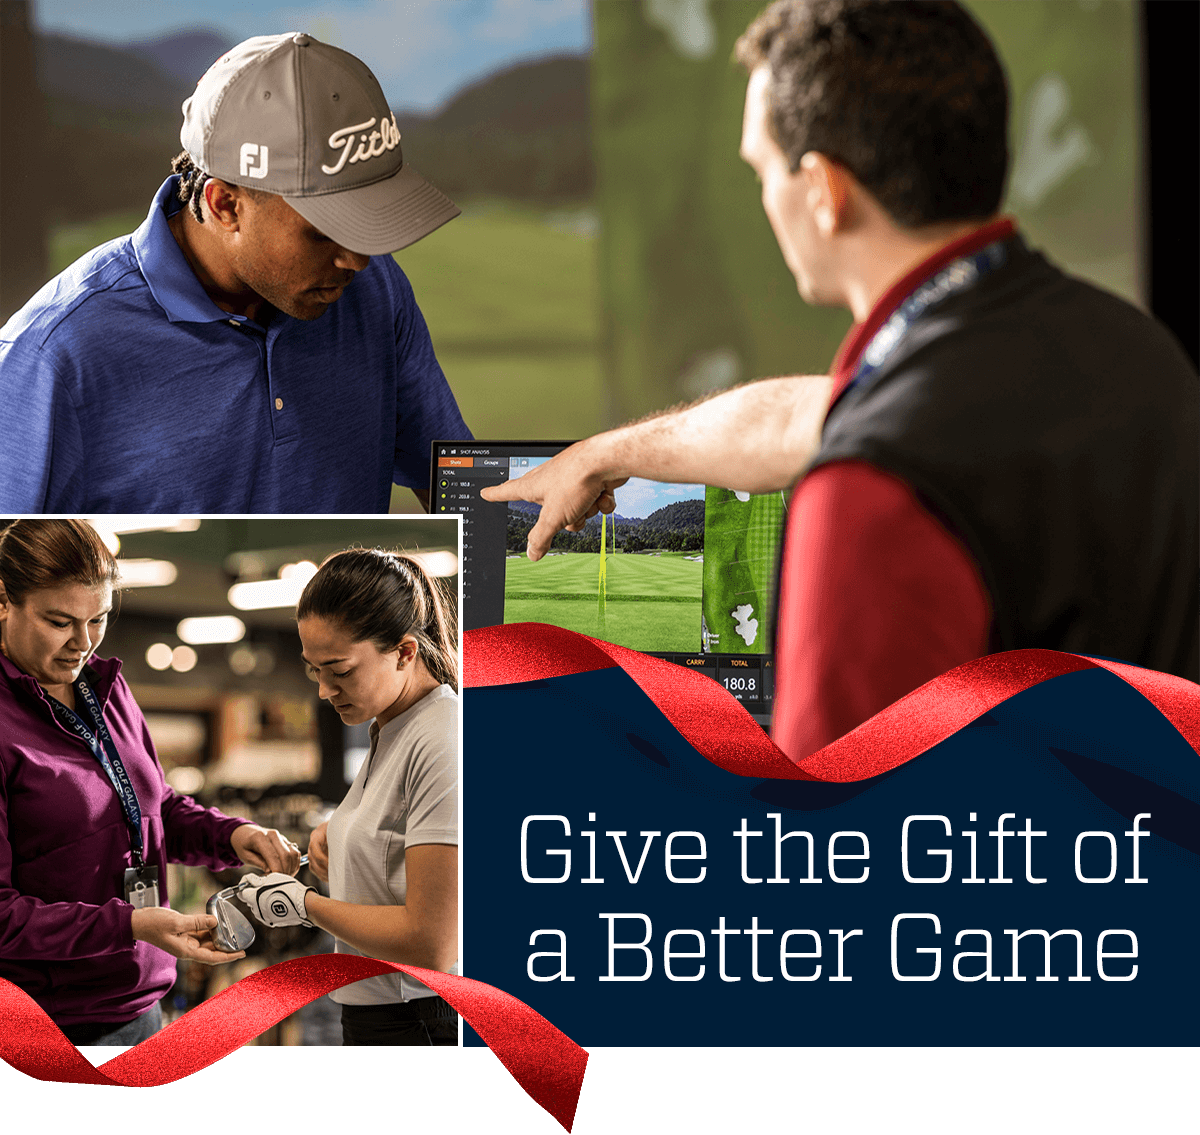 Give the gift of a better game.